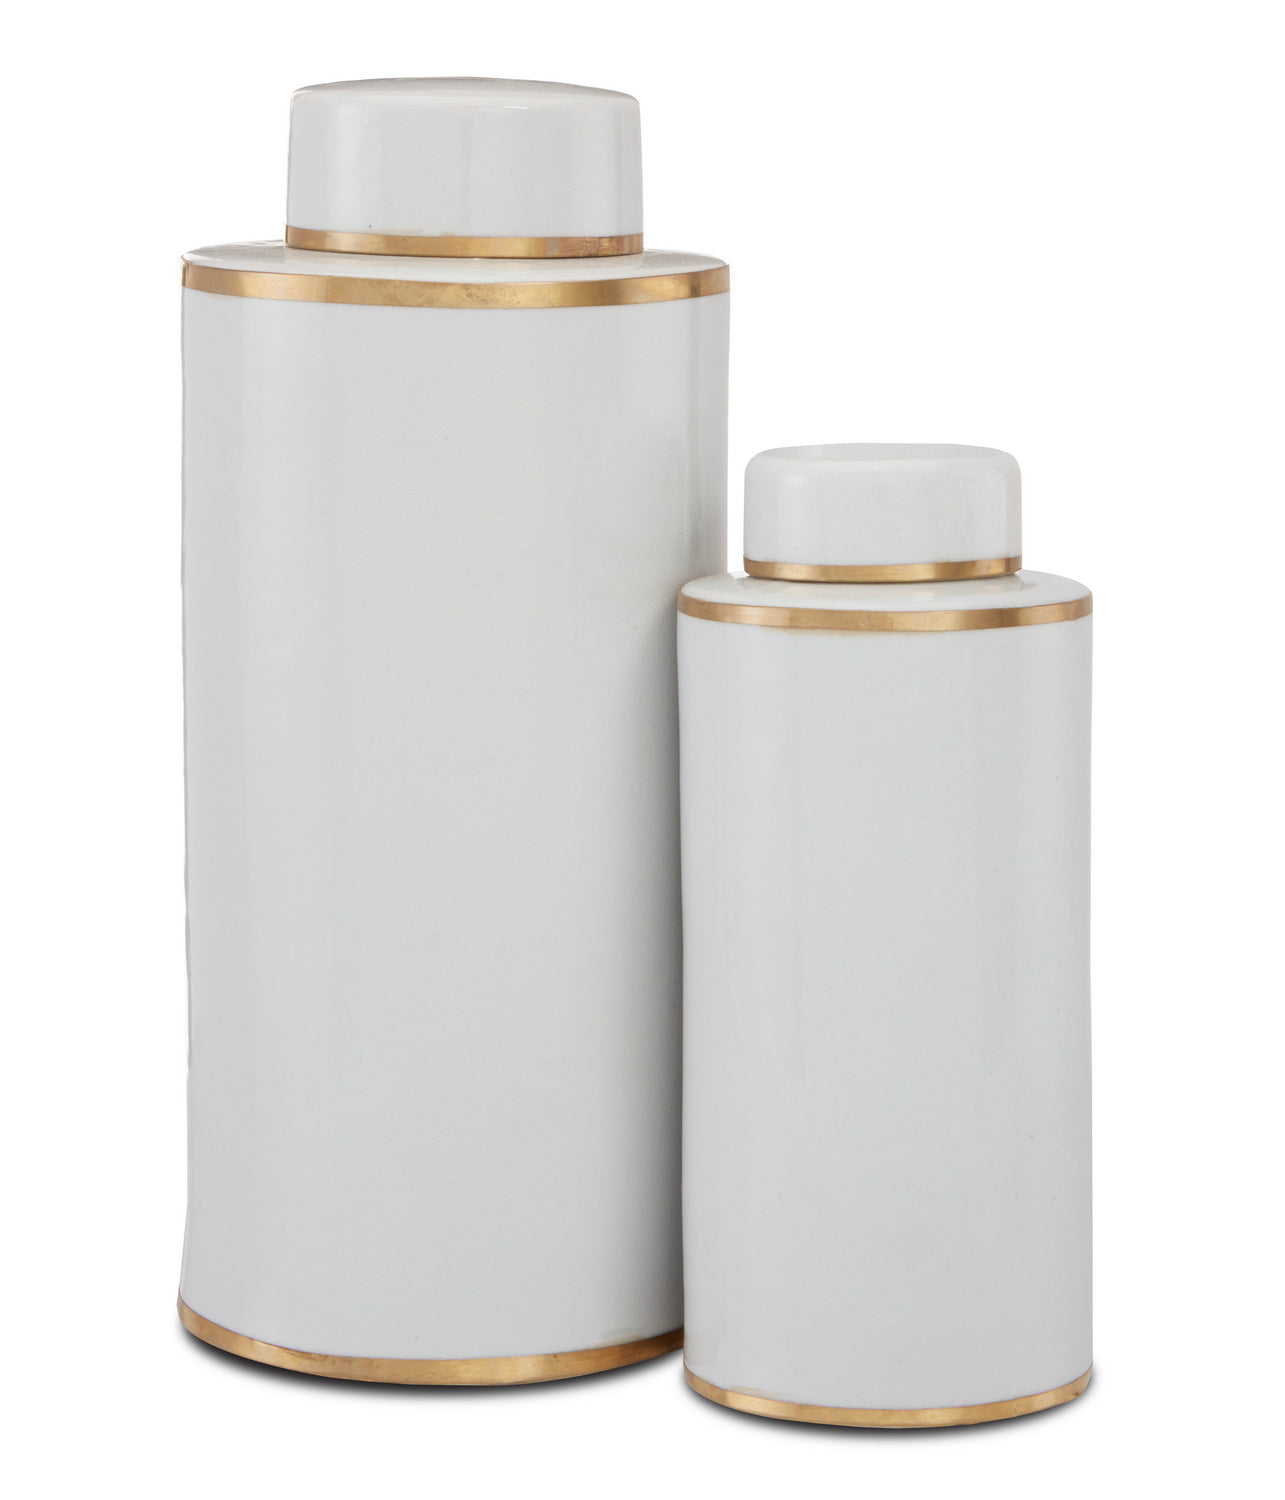 Canister Set of 2 from the Ivory collection in White/Antique Brass finish